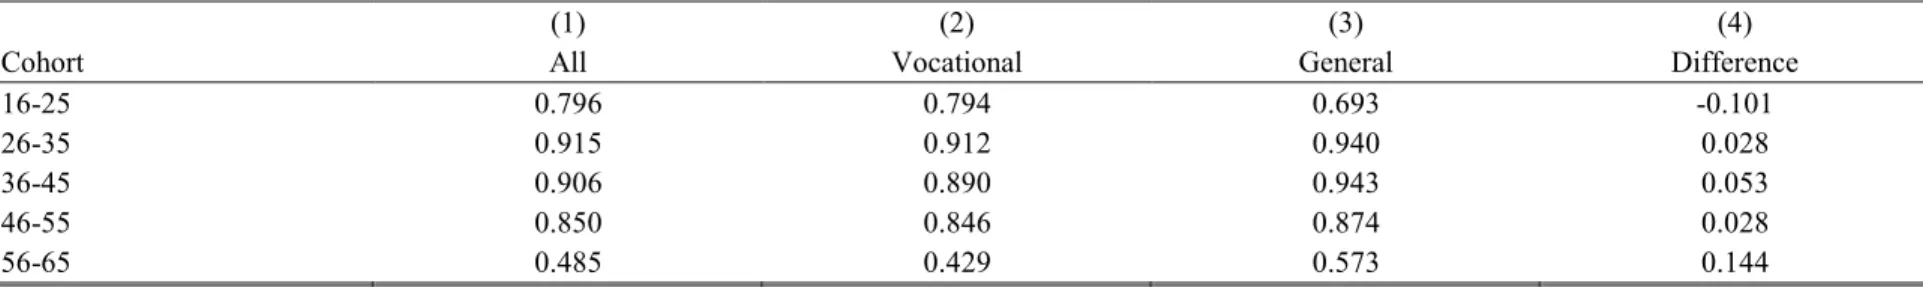 Table 4:  Percentage Employed by Education Type and Age Cohort 